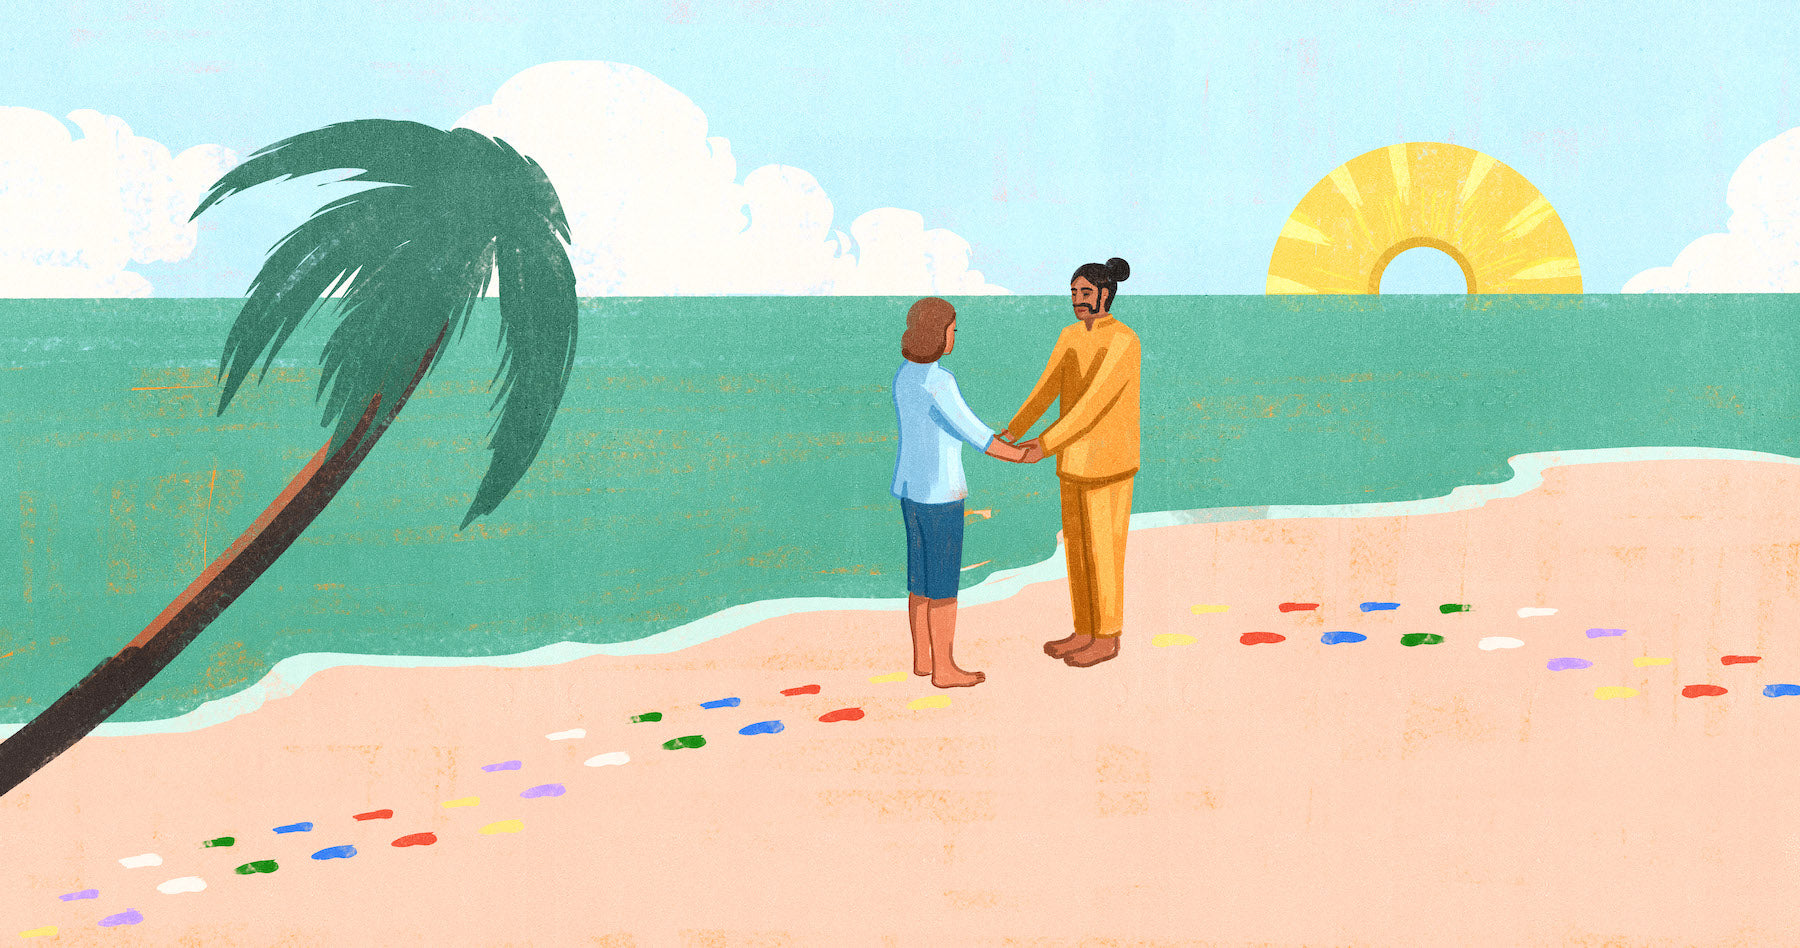 Illustration of a south asian man and a caucasian woman standing on a Sri Lankan beach facing each other holding hands with a palm tree in the foreground leaning towards them. The half sun that is rising is a pineapple. 